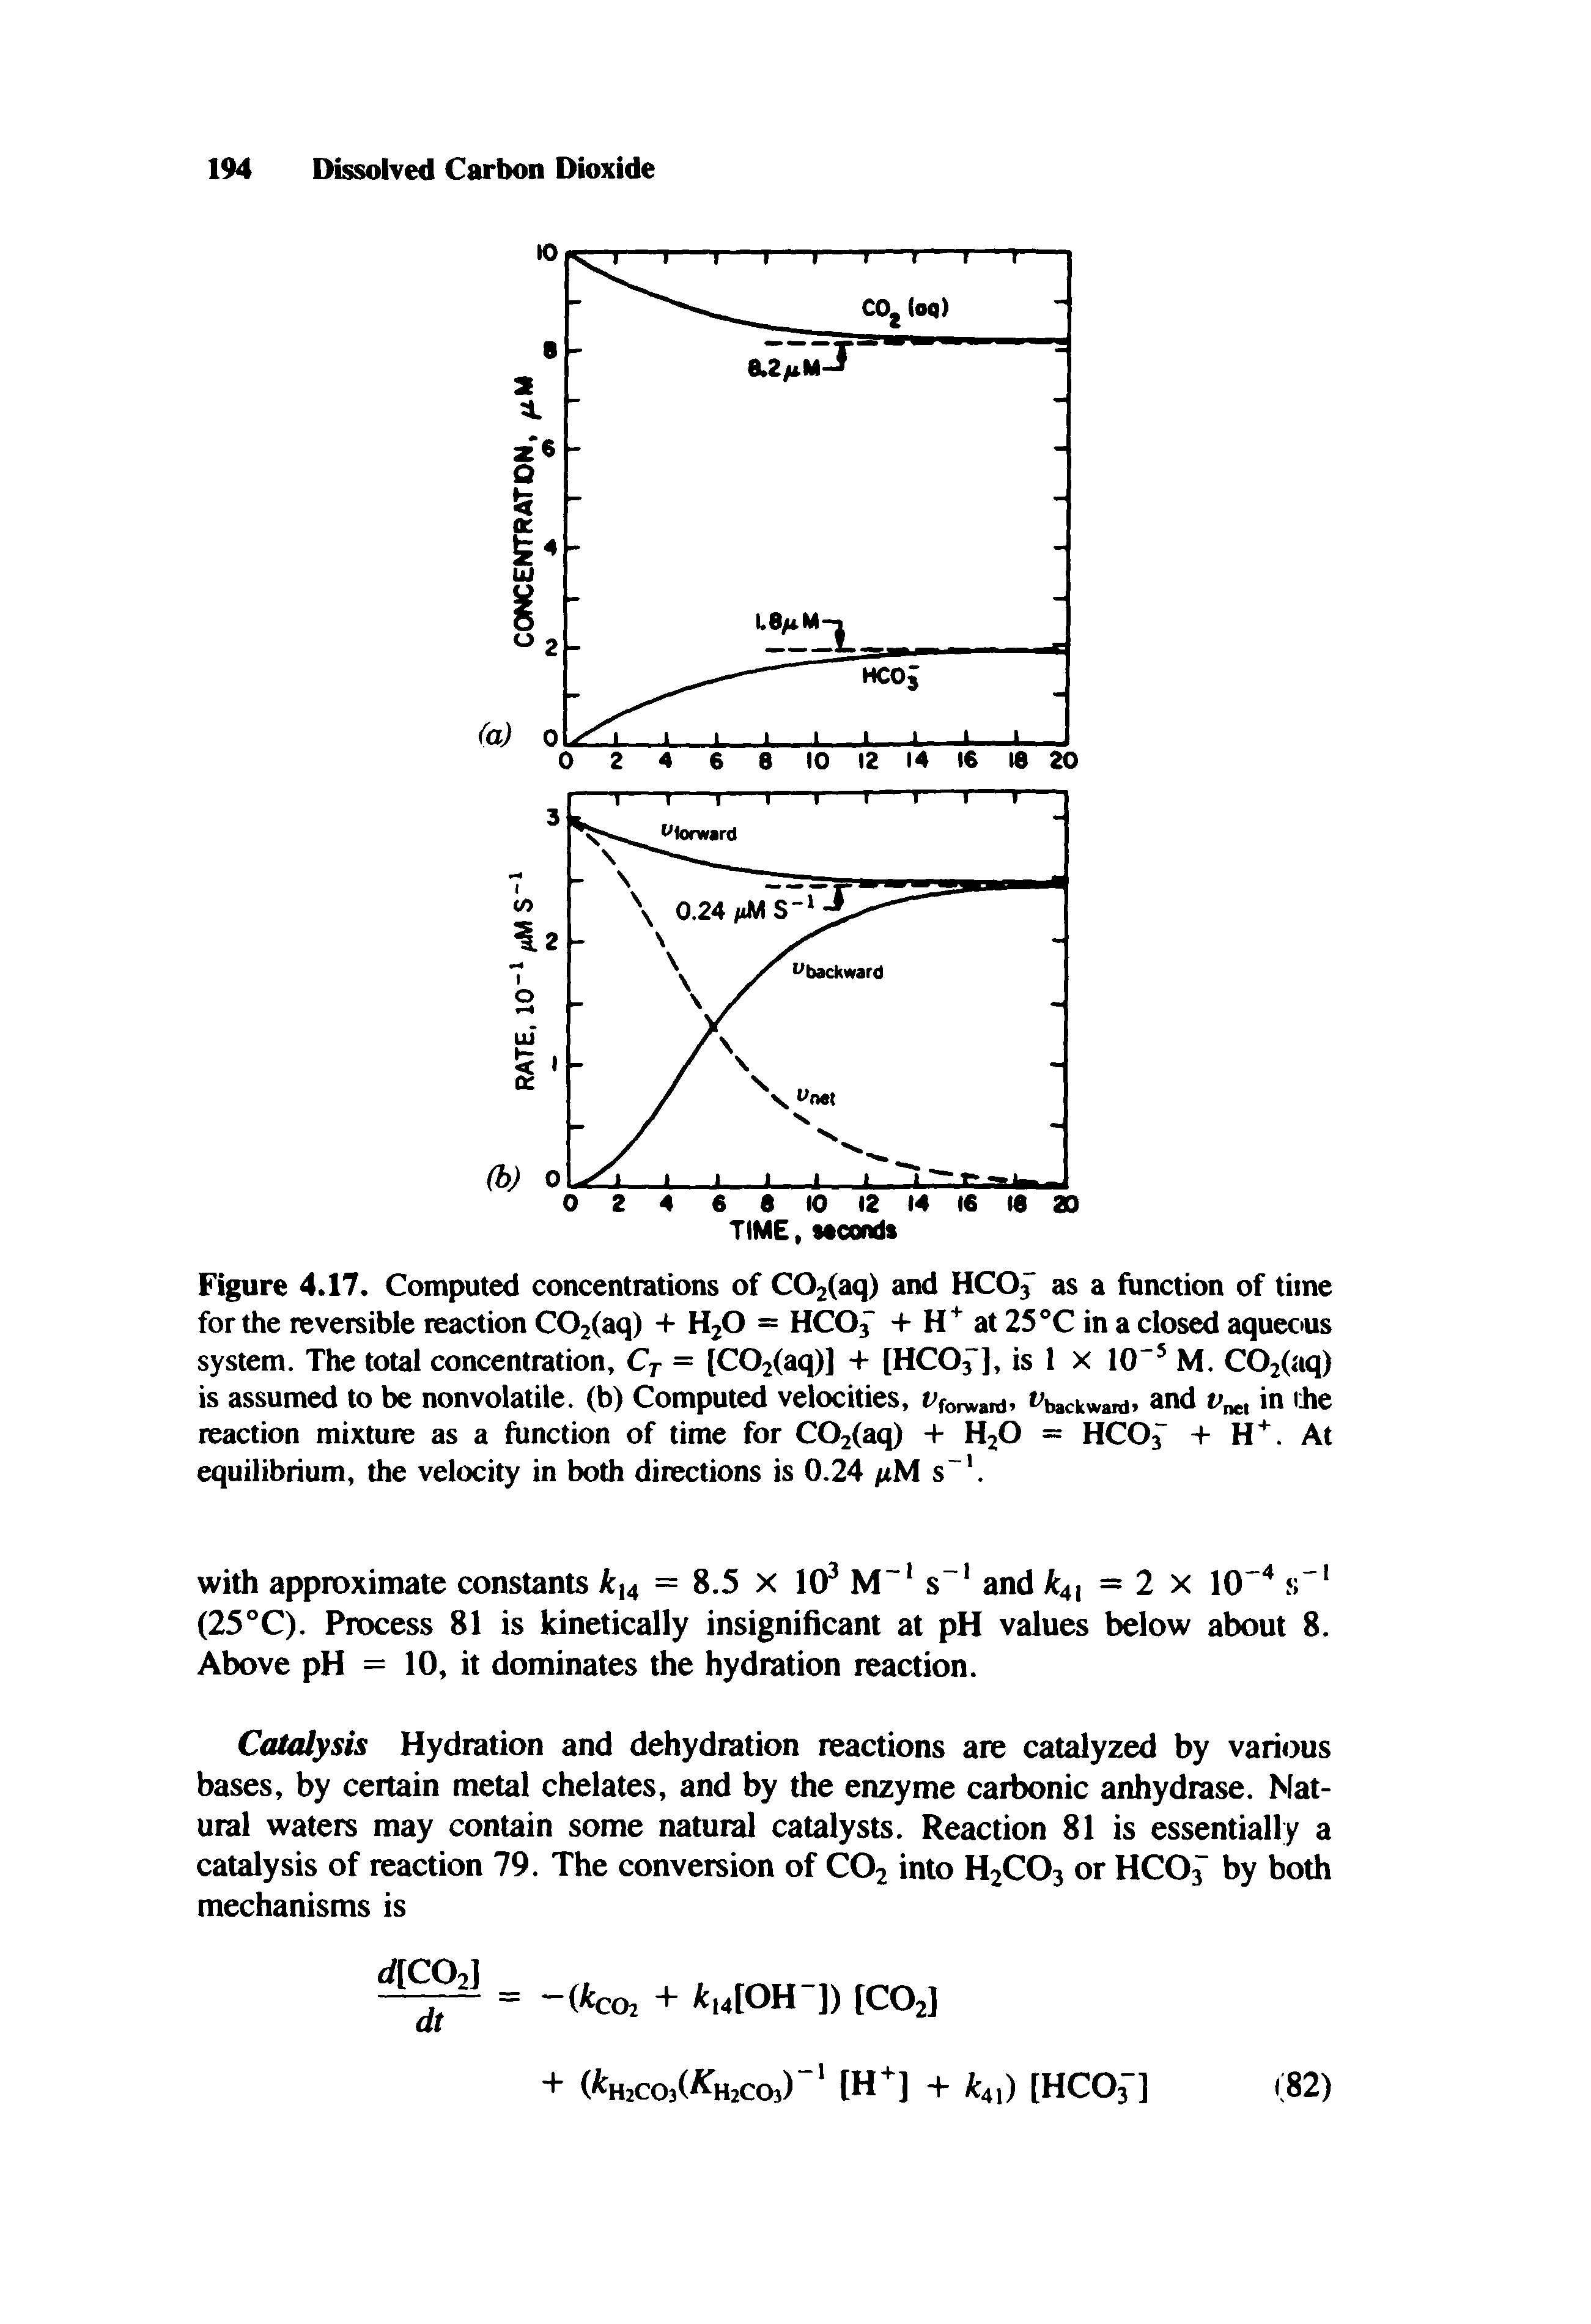 Figure 4.17. Computed concentrations of C02(aq) and HCOf as a function of time for the reversible reaction C02(aq) + H2O = HCO + at 25 C in a closed aqueous system. The total concentration, Cj = [C02(aq)] + [HCOf ], is 1 x 10 M. C02(aq) is assumed to be nonvolatile, (b) Computed velocities, t fonvanJ> t backwam. and in ibe reaction mixture as a function of time for C02<aq) + H2O = HCOj" + H. At equilibrium, the velocity in both directions is 0.24 s V...